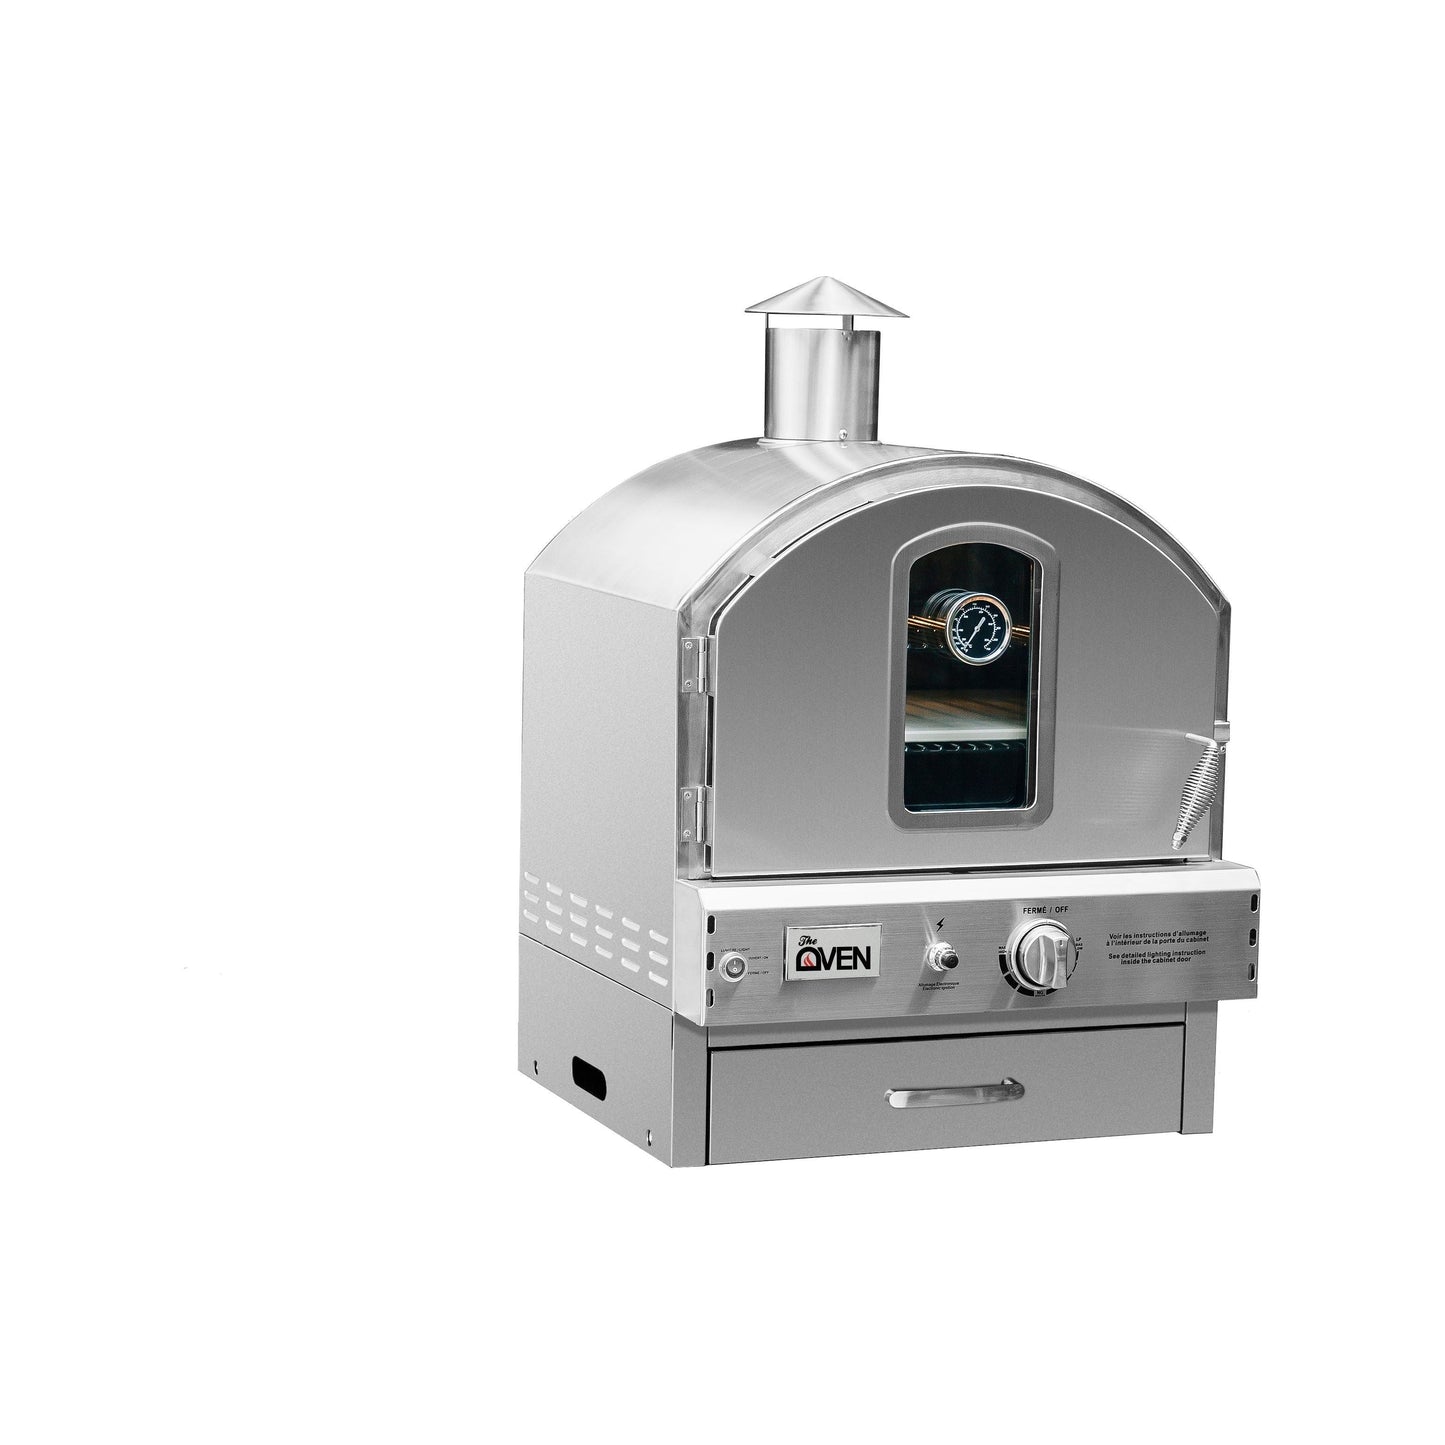 Pizza Makers & Ovens - Summerset Stainless Steel Built-In / Countertop Liquid Propane Gas Fired Outdoor Pizza Oven - SS-OVBI-LP